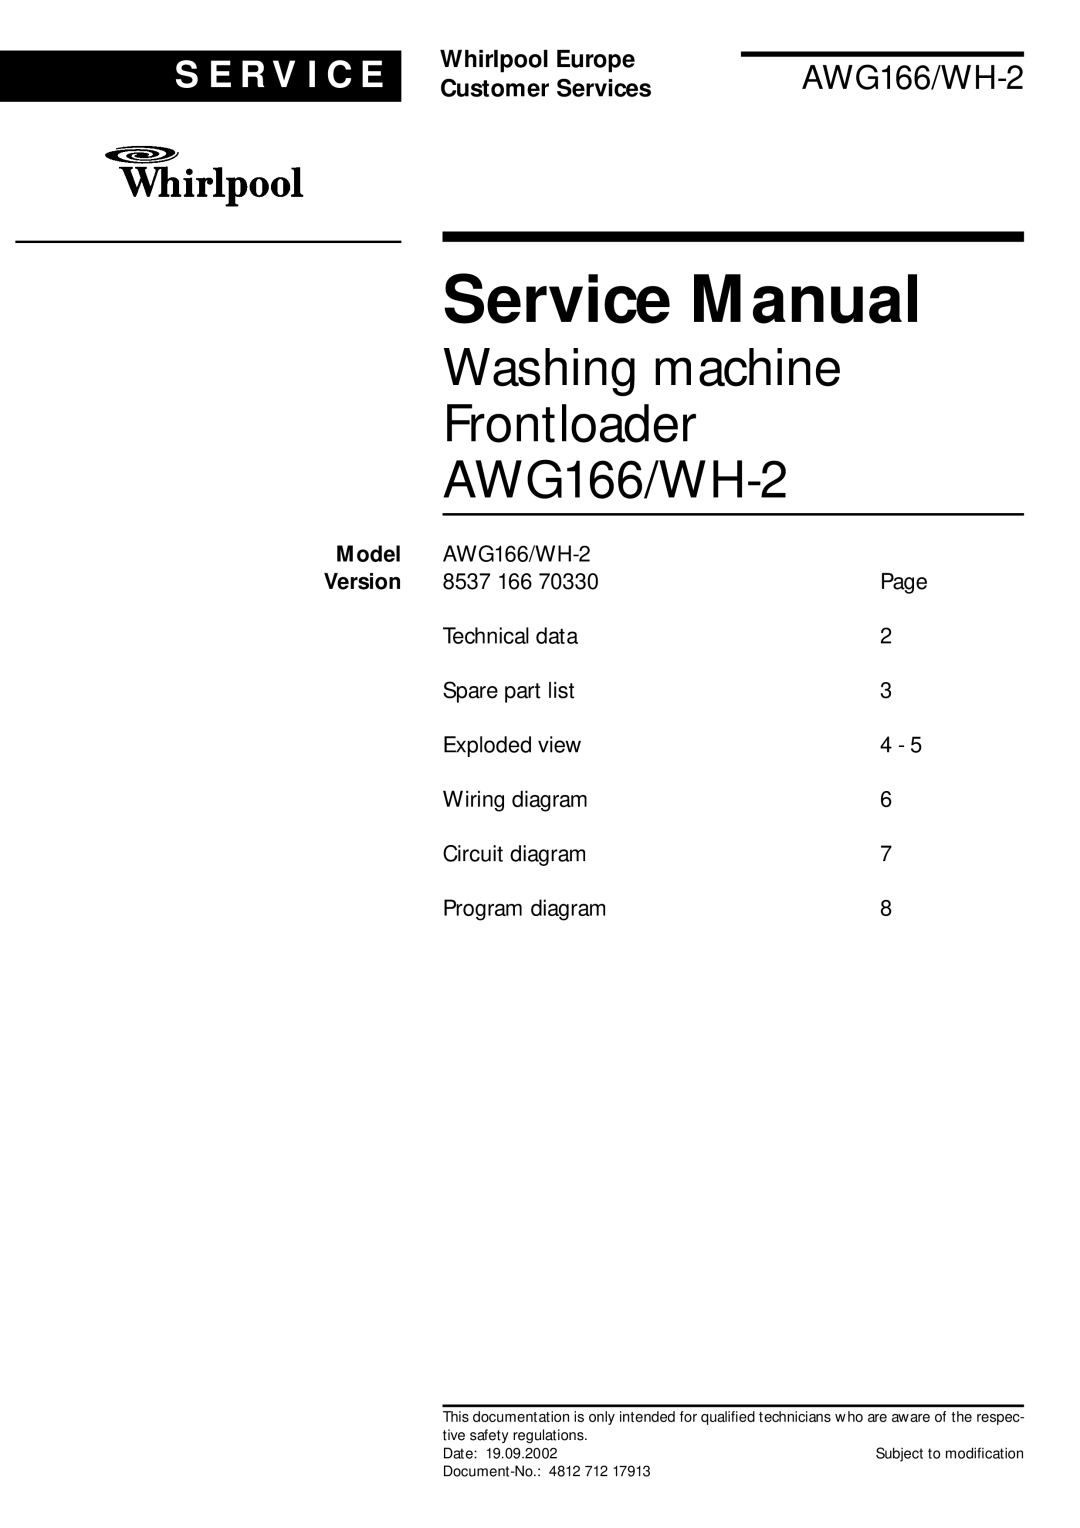 Whirlpool AWG166 WH-2 service manual Model, Service Manual, Washing machine Frontloader AWG166/WH-2, S E R V I C E, Page 